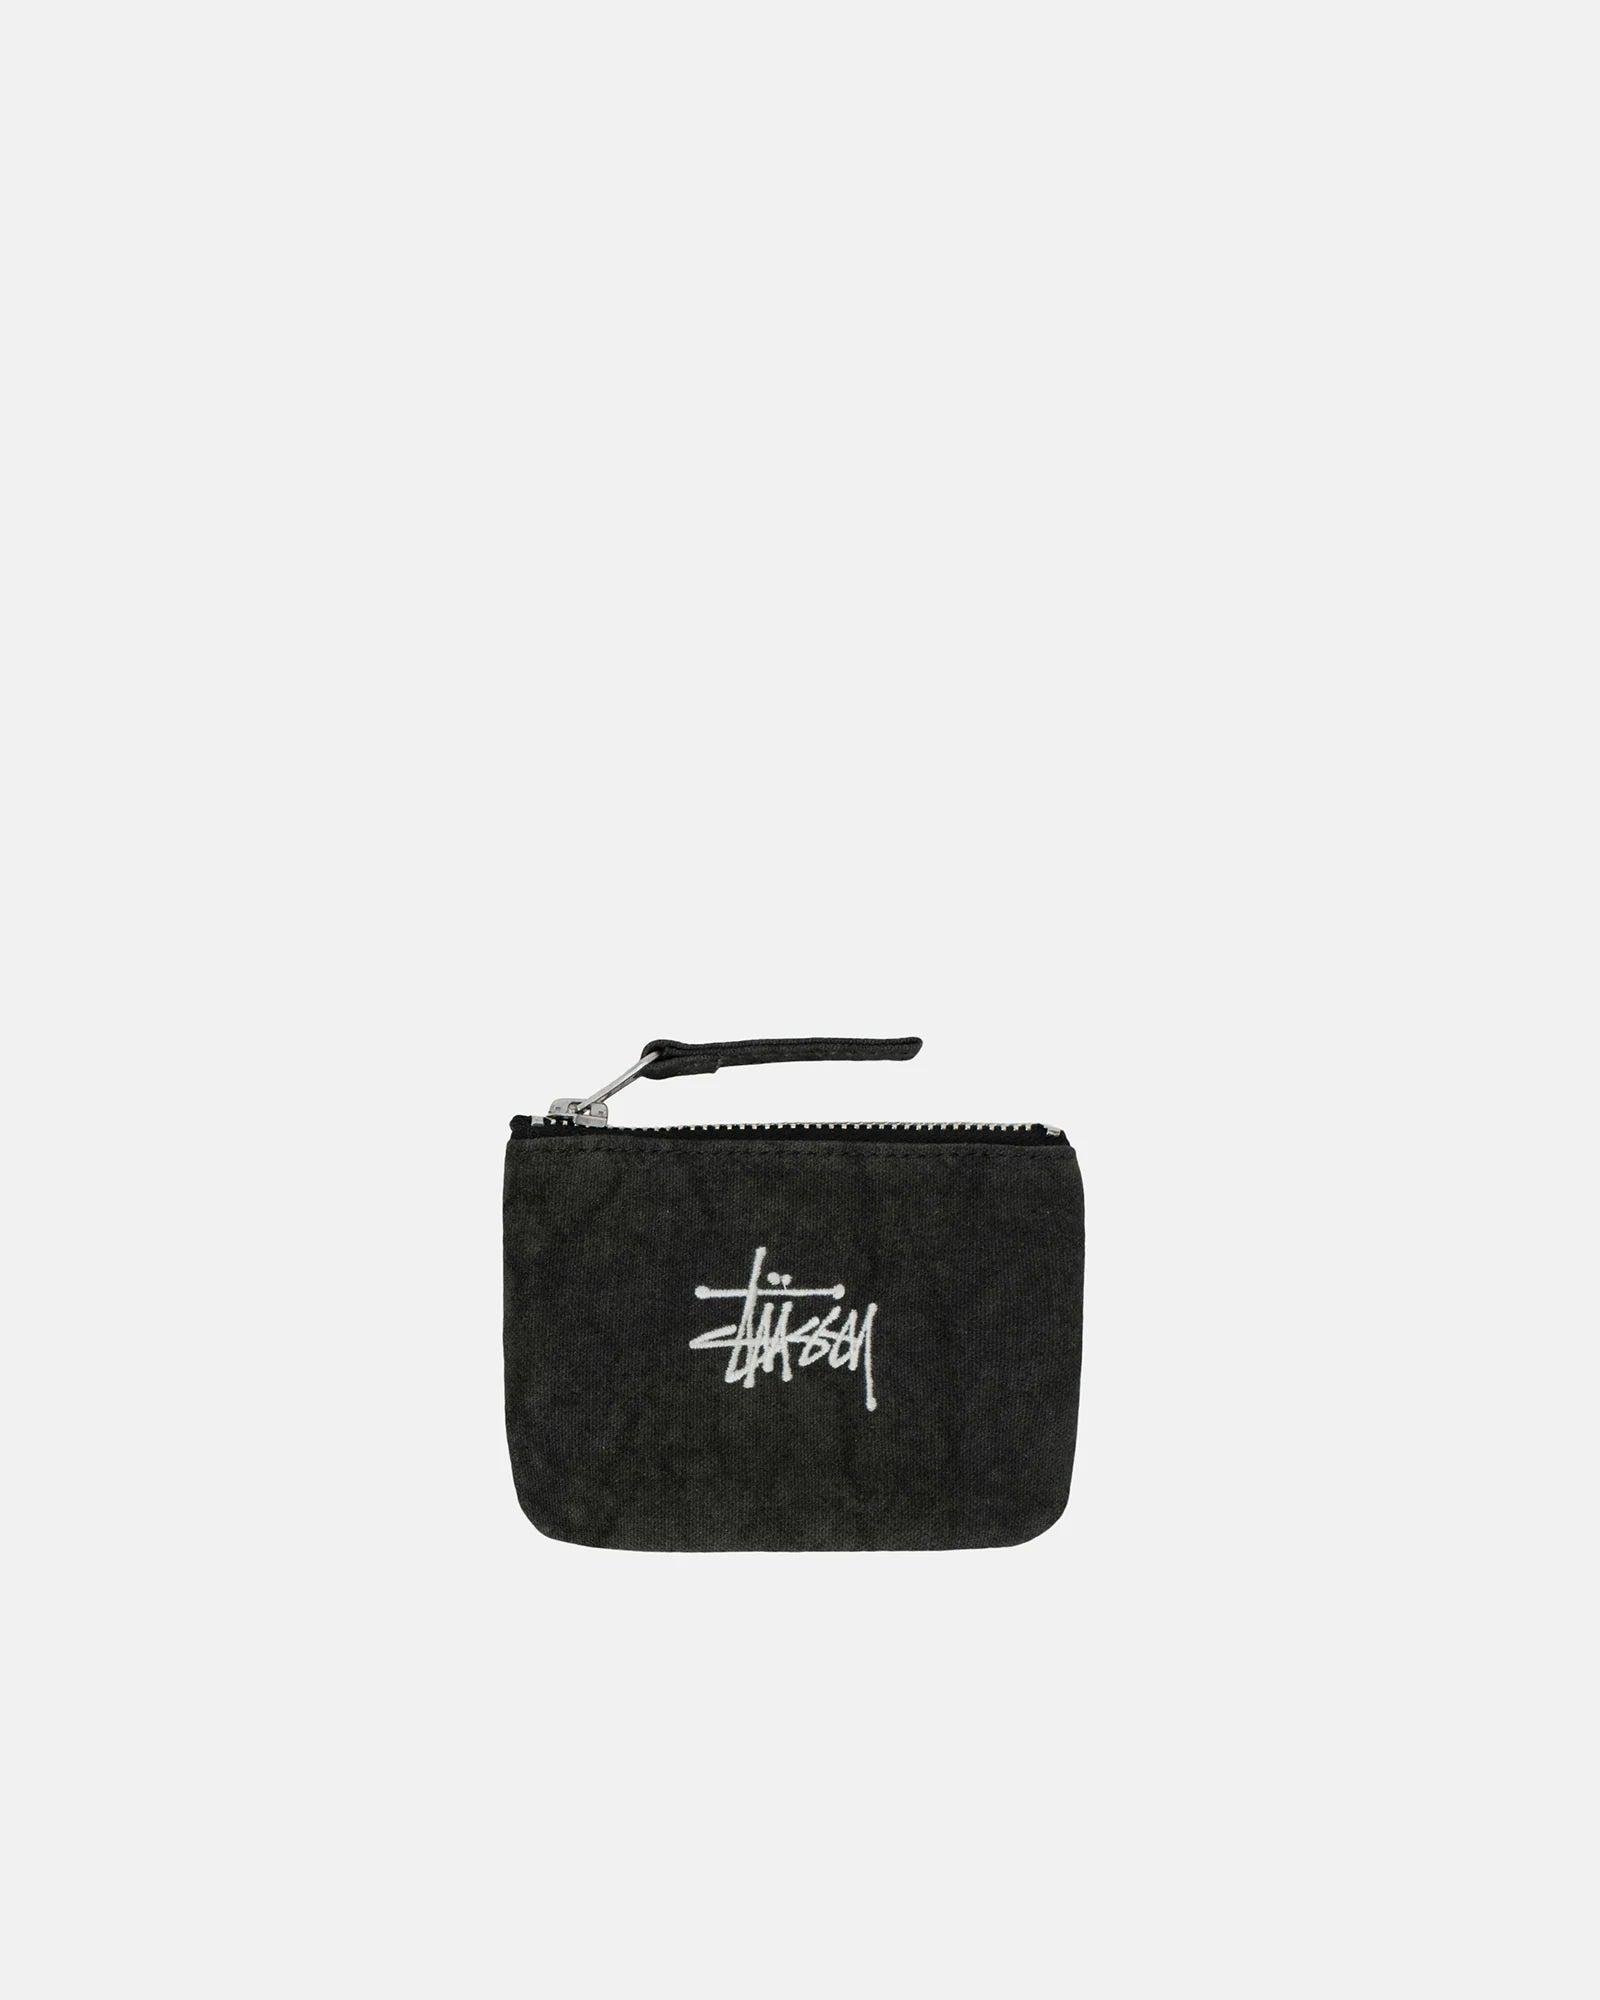 Stussy - Men's Canvas Coin Pouch - (Washed Black) by STUSSY